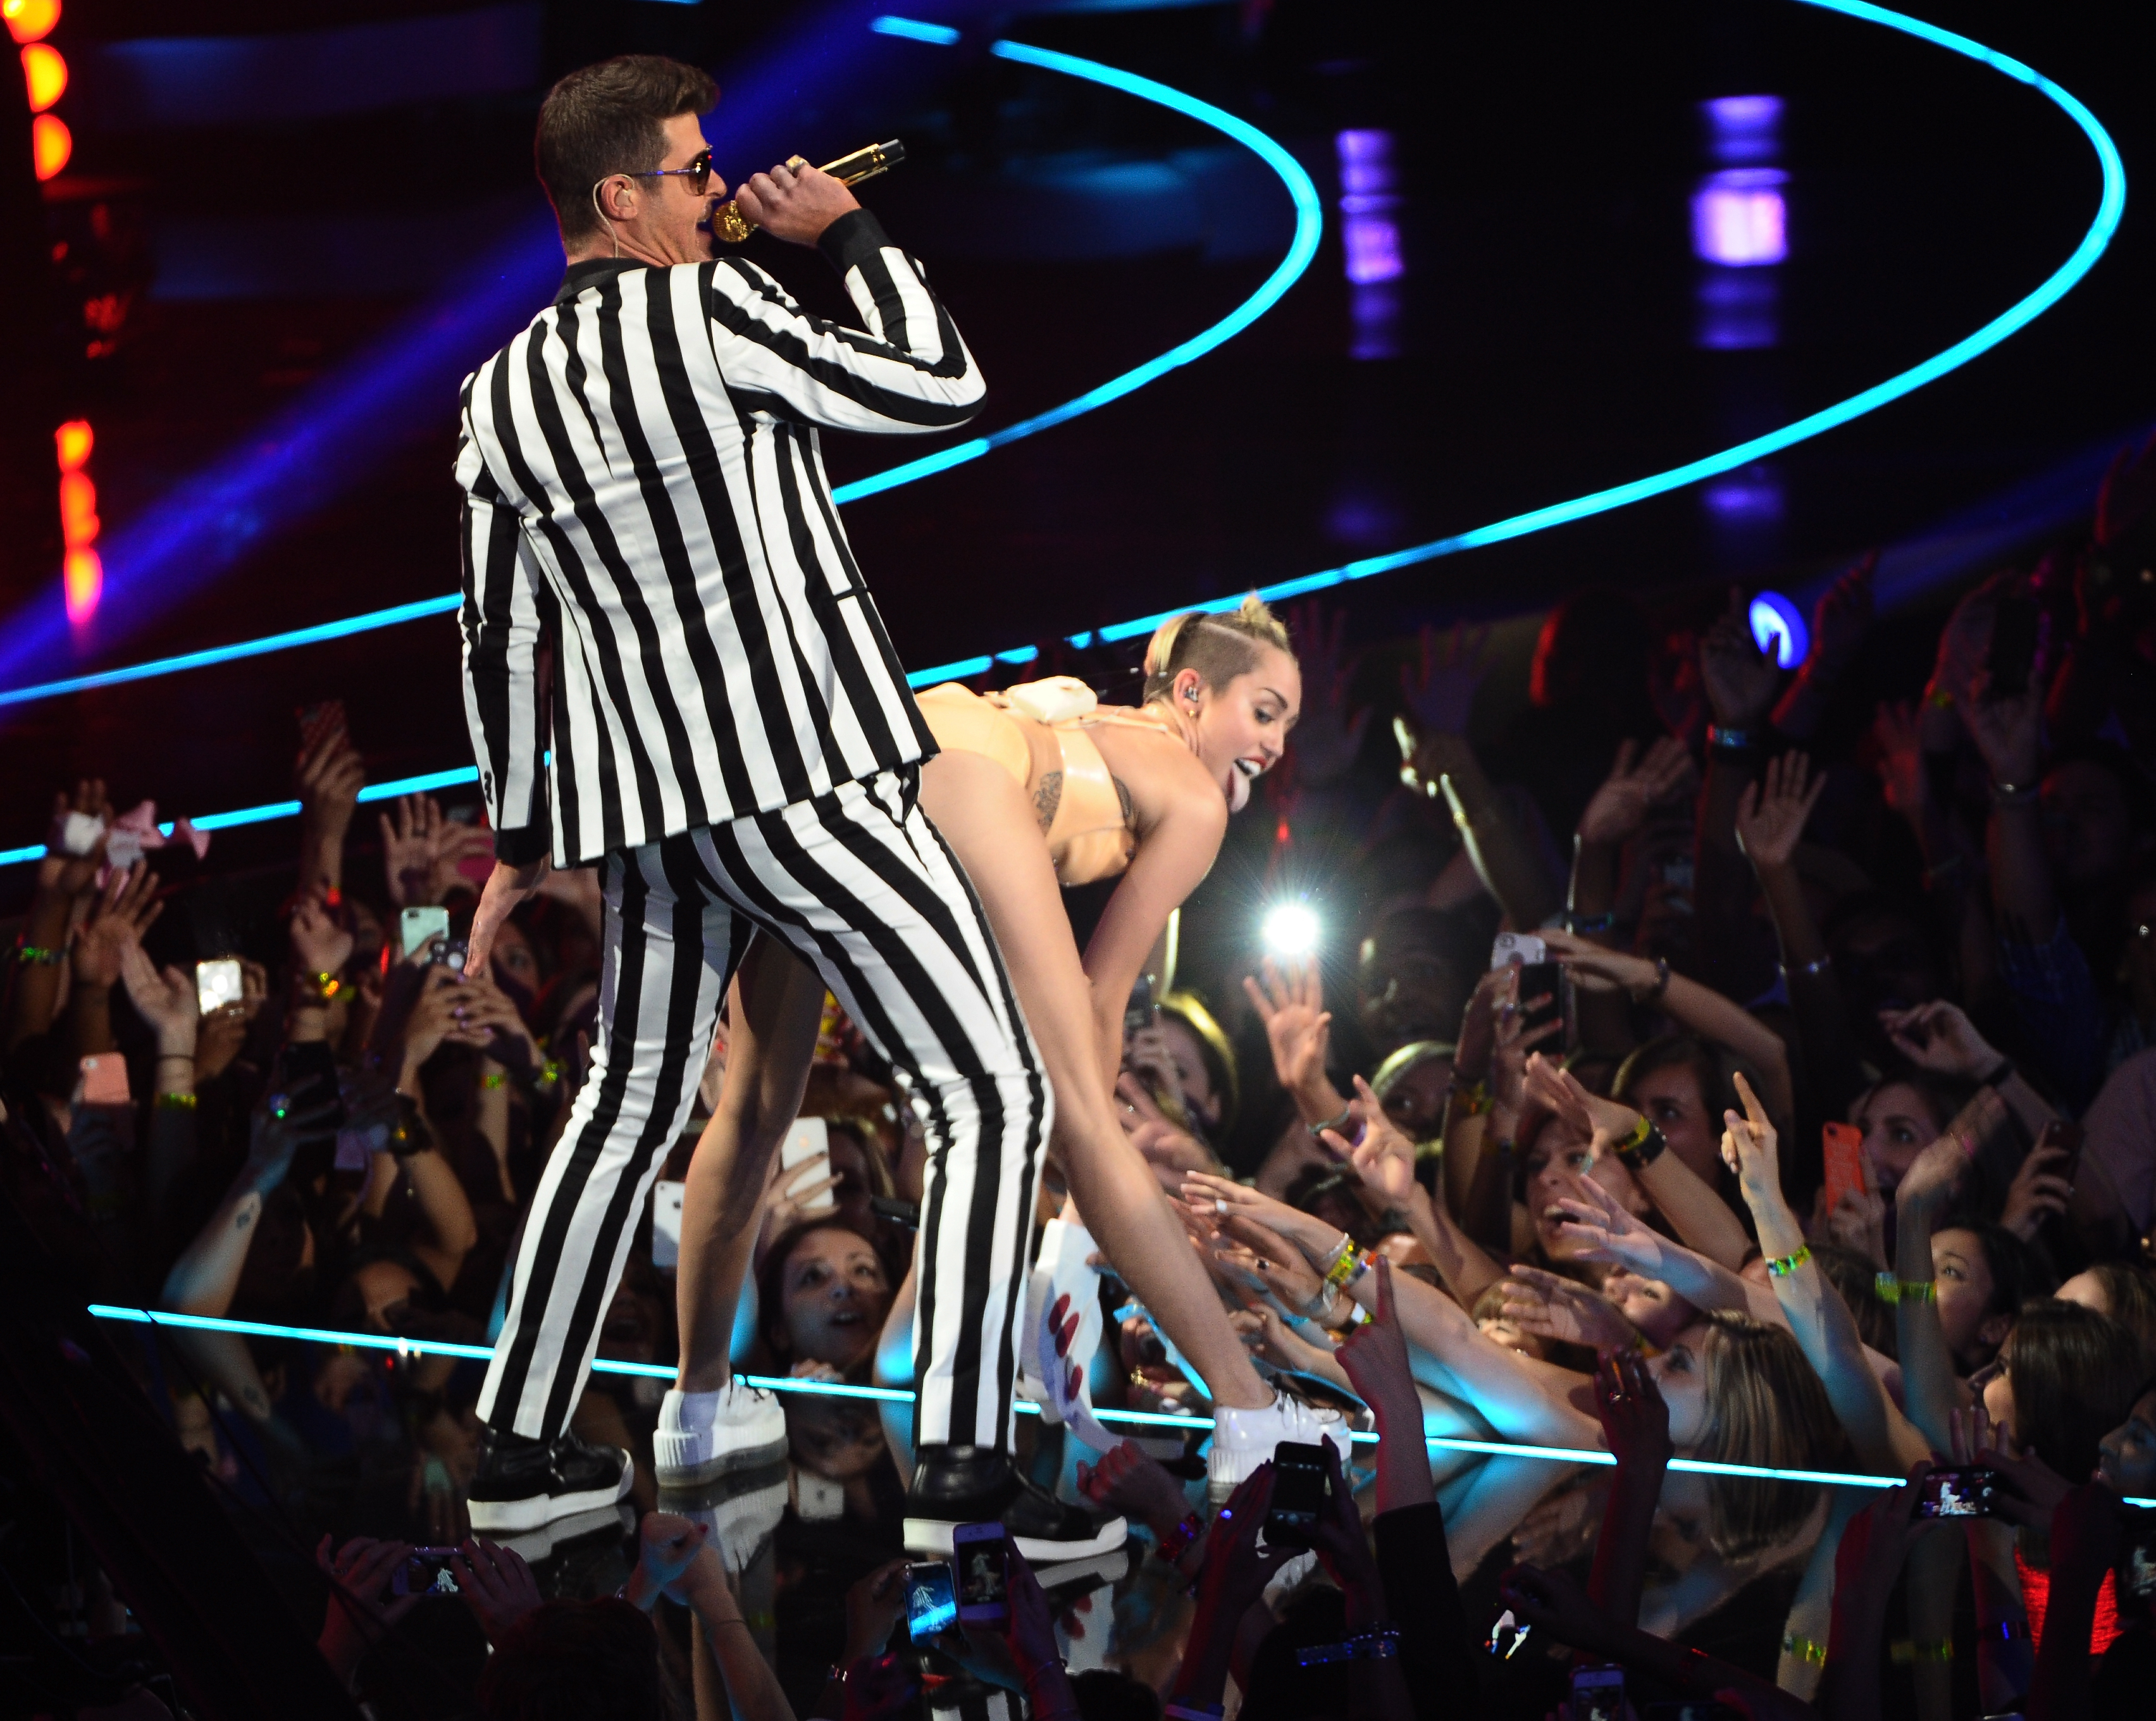 Miley Cyrus performs at the VMAs with Robin Thicke